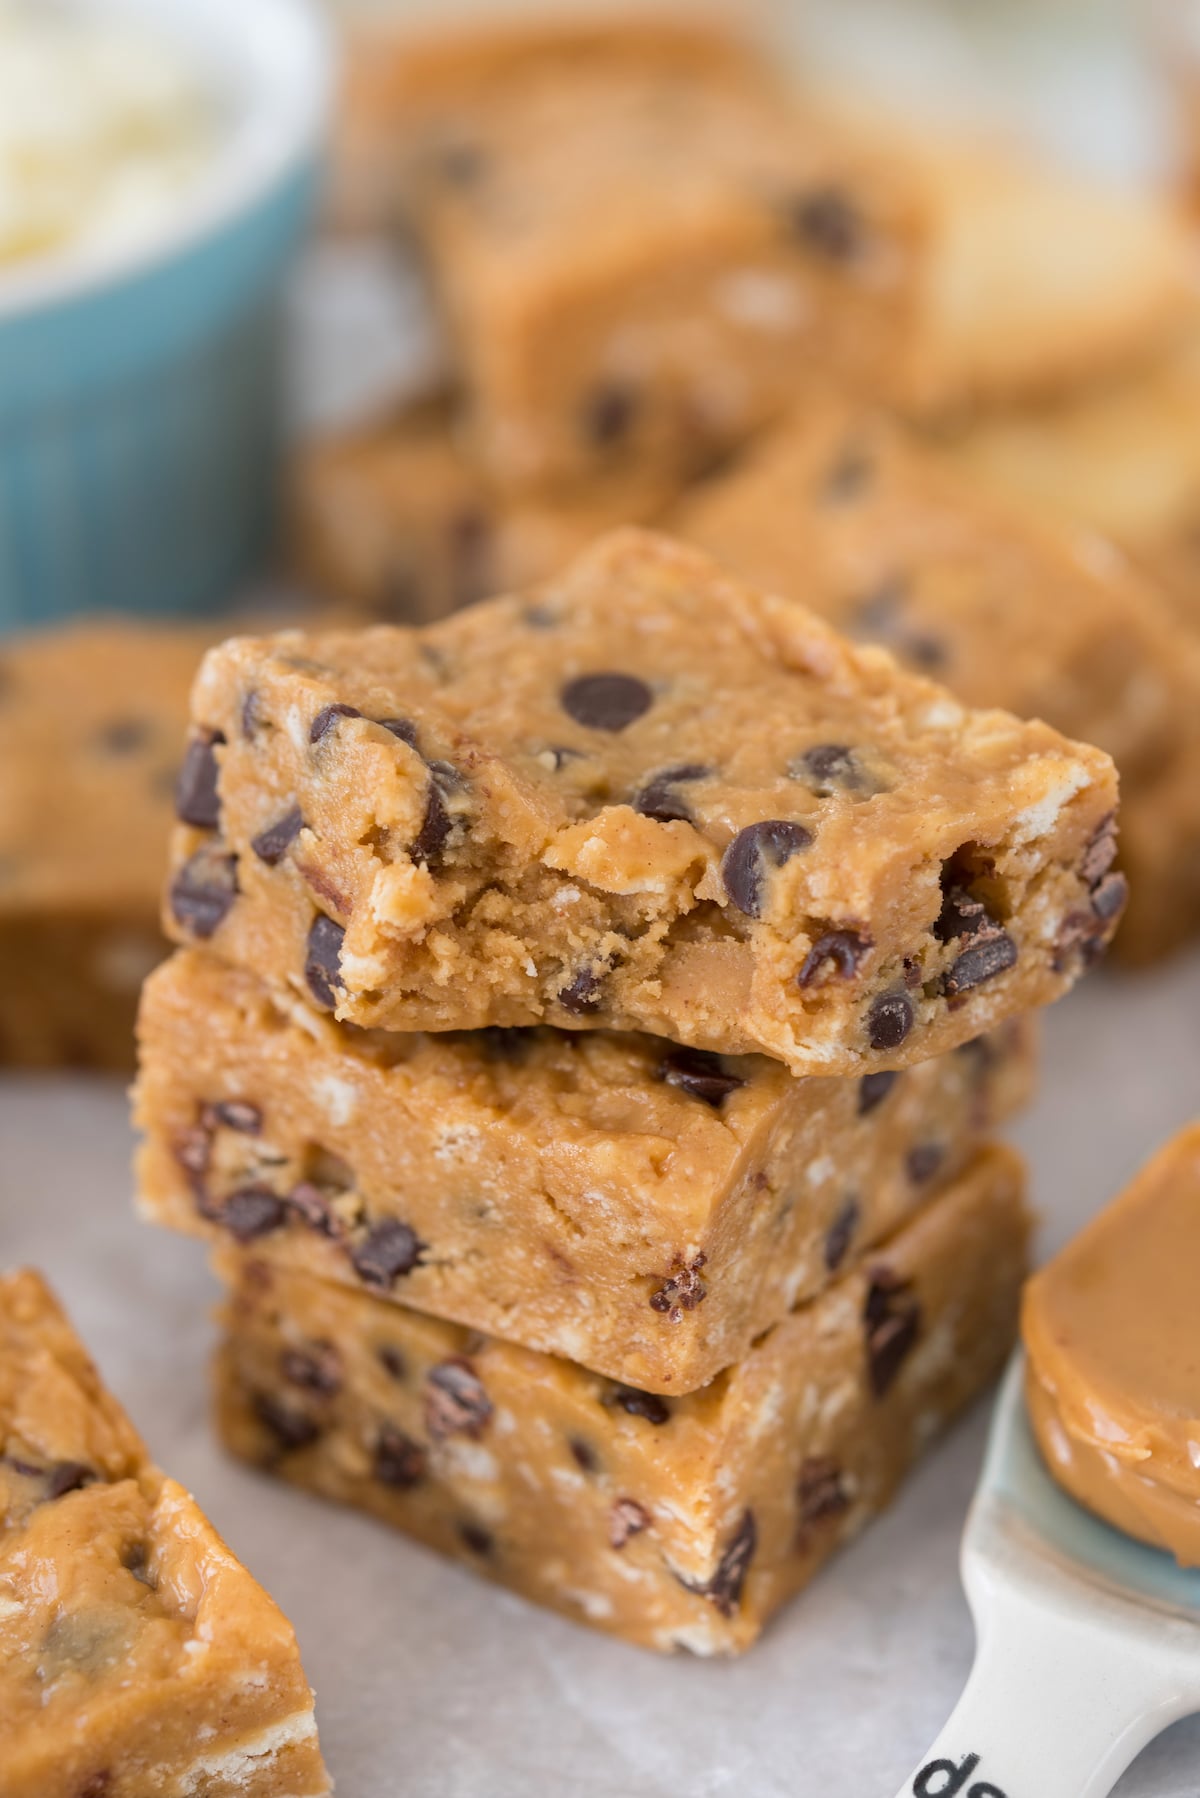 stacked peanut butter bars with chocolate chips baked in.